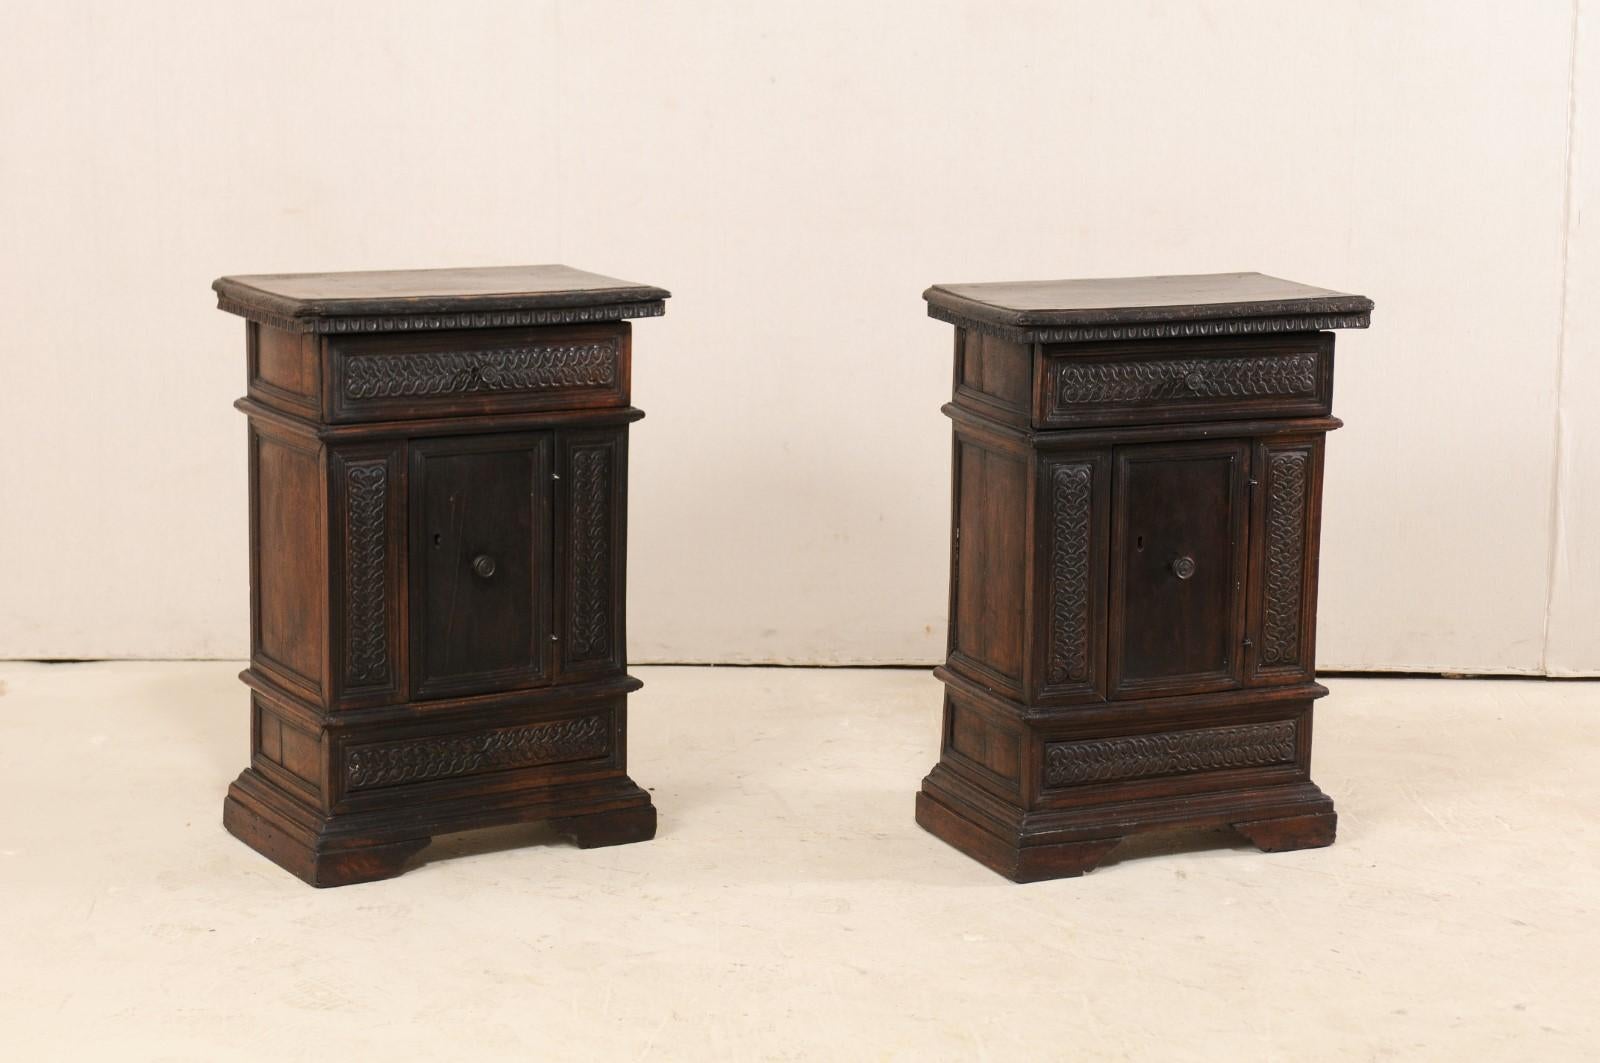 A pair of small-sized Italian walnut wood side chests from the 18th century. These antique cabinets from Italy have rectangular-shaped tops, with hand carved egg-and-dart trim along their undersides, which rests atop their cases each adorn in